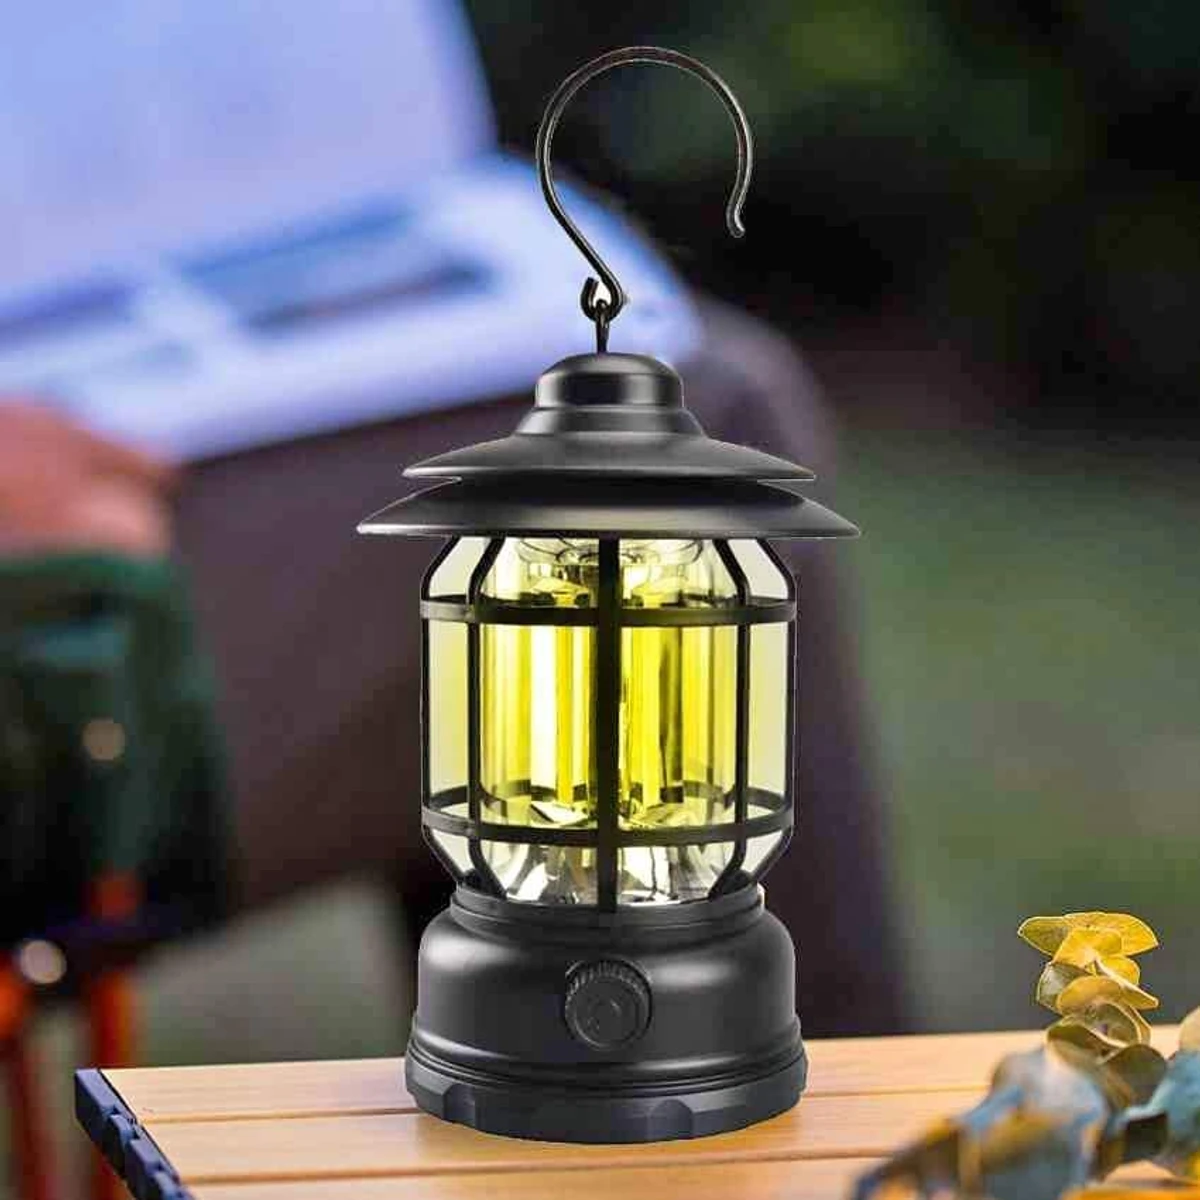 Portable Emergency COB LED Tent Lamp for Camping Light